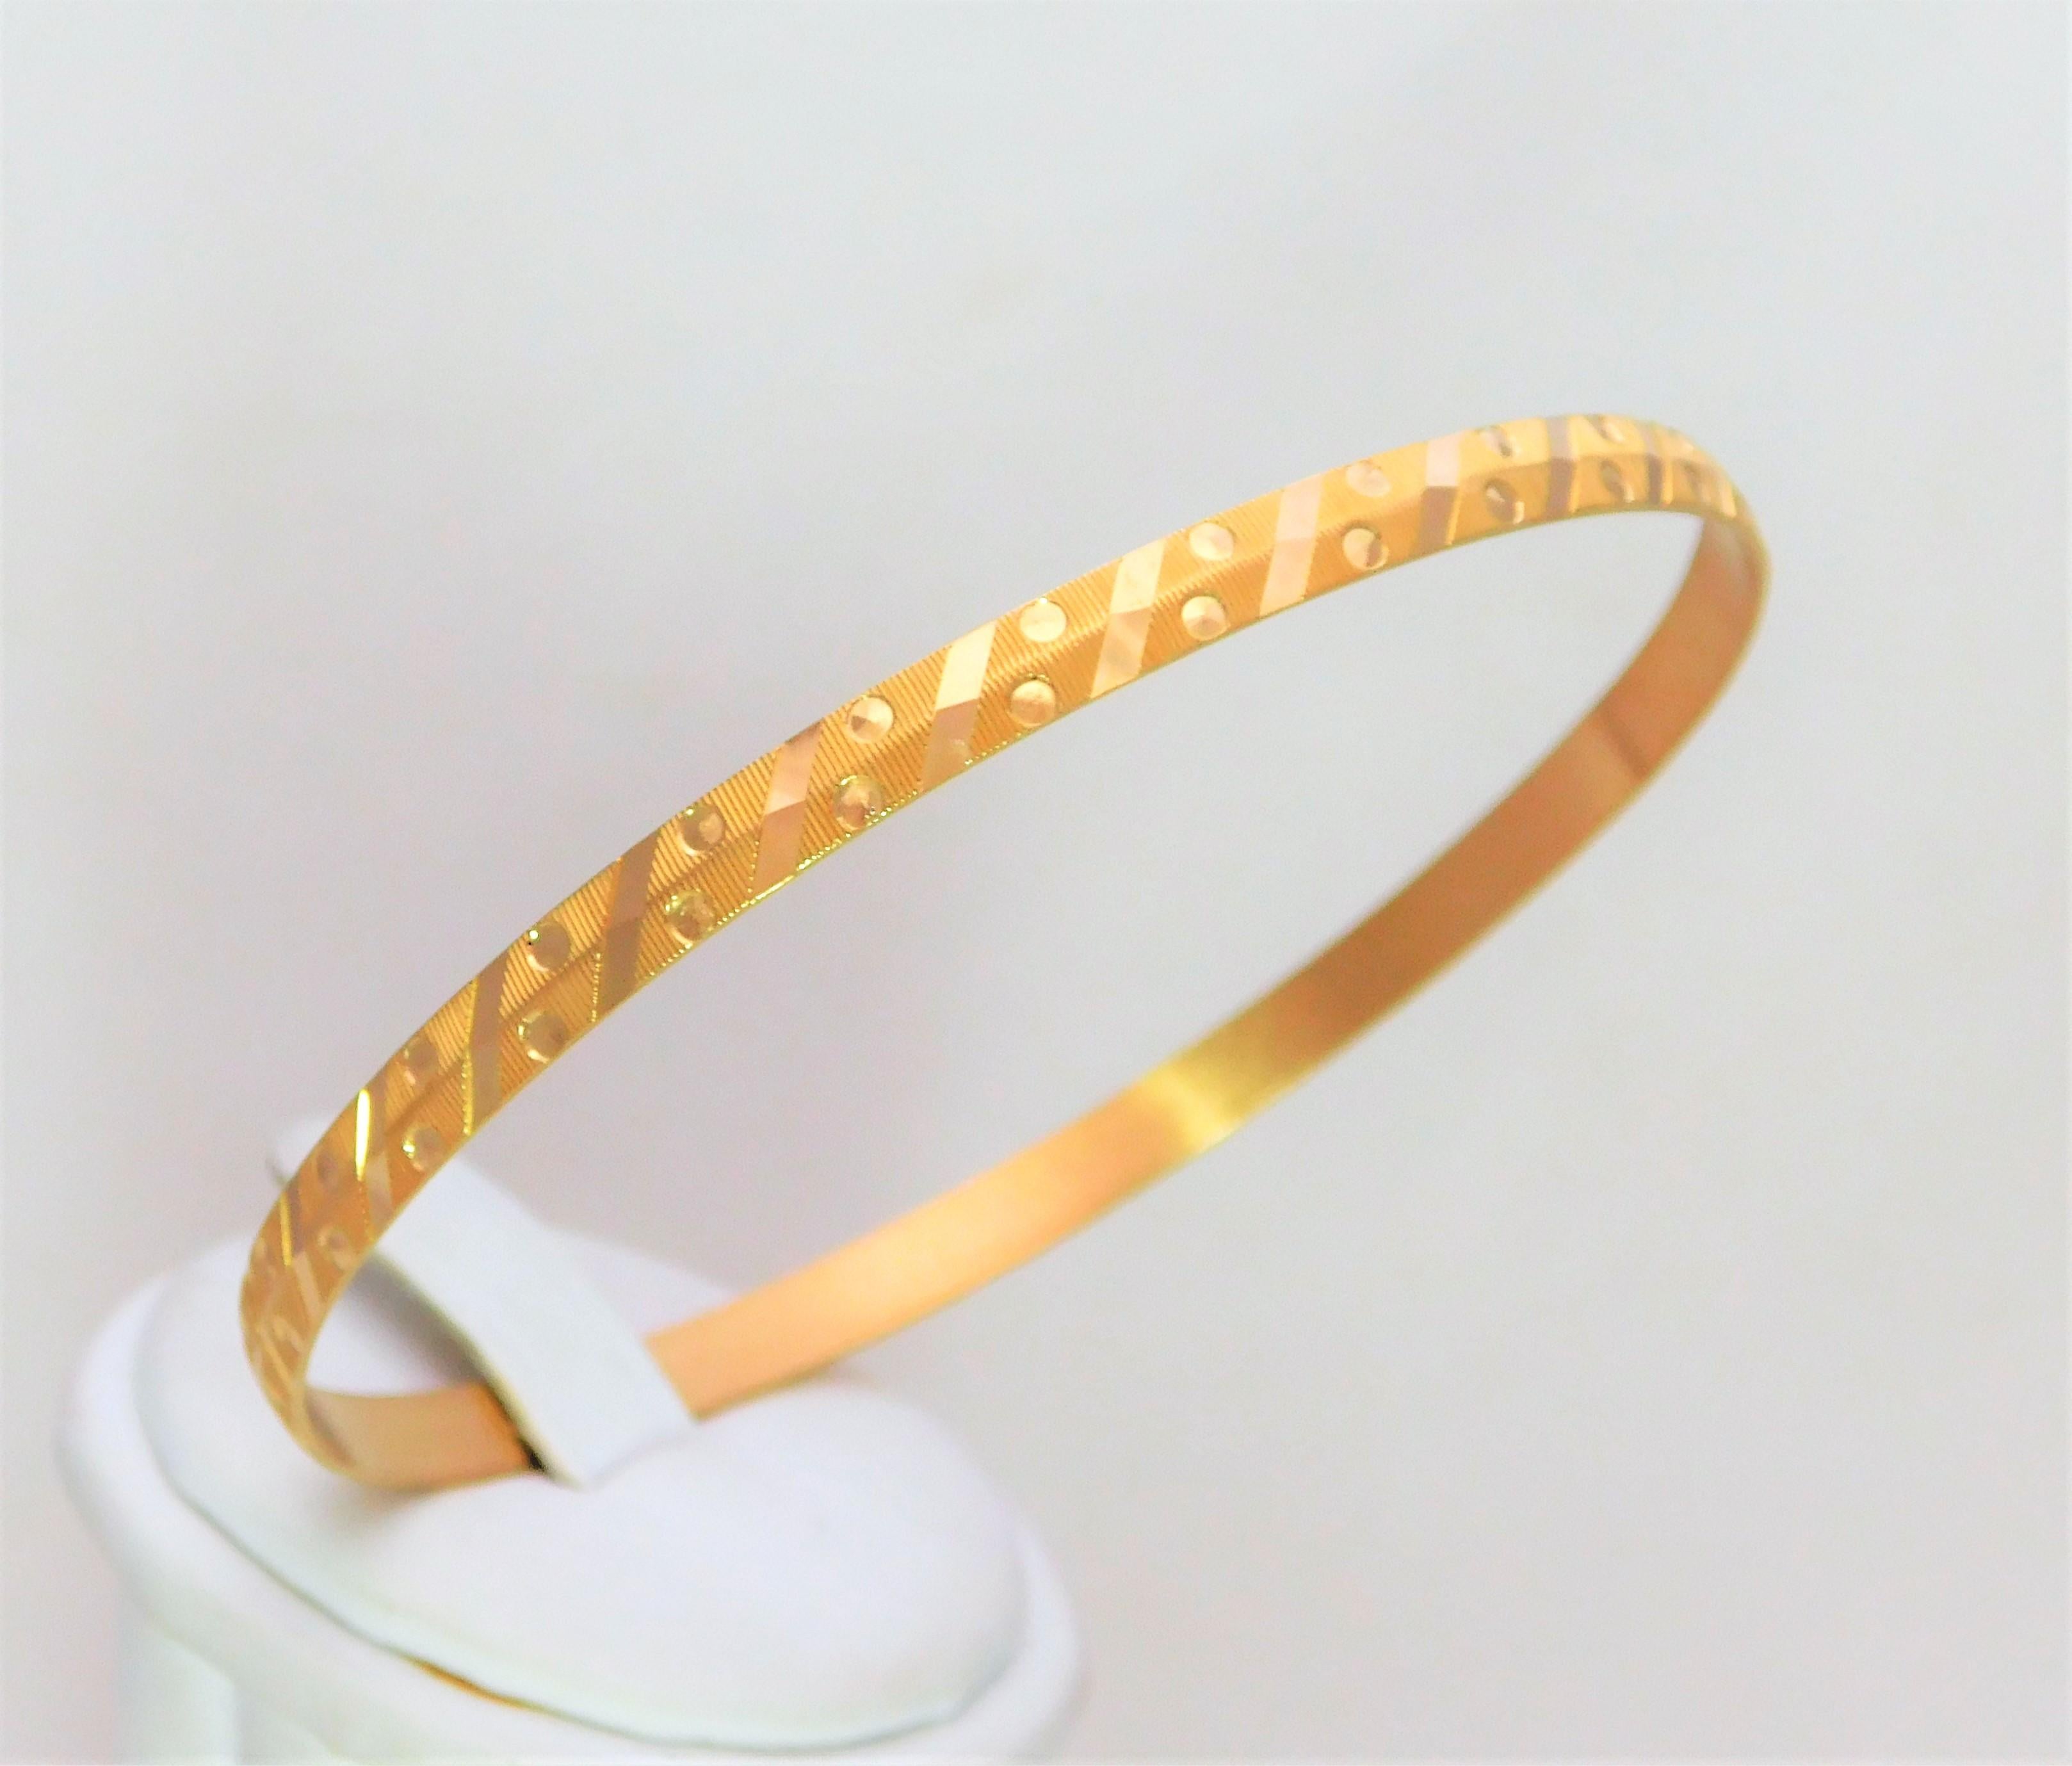 Vintage Persian 21 Karat Gold Bangle Bracelet In Good Condition For Sale In Metairie, LA